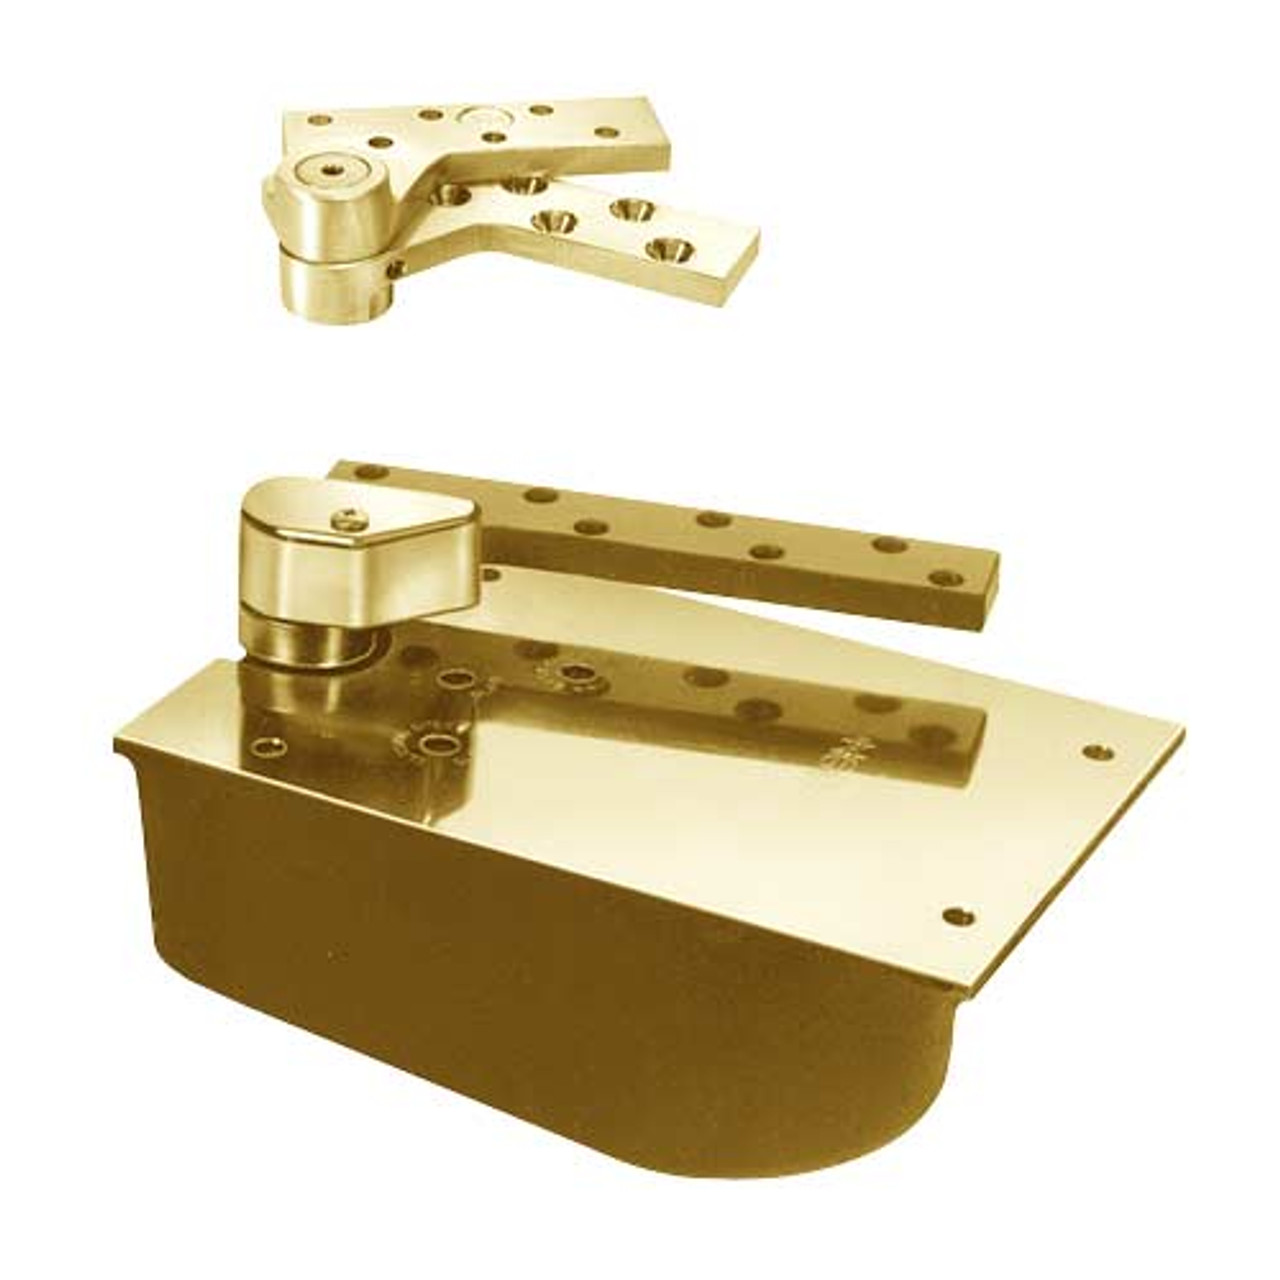 L27-90S-LTP-RH-1-3/4-605 Rixson 27 Series Extra Heavy Duty Lead Lined Offset Floor Closer in Bright Brass Finish